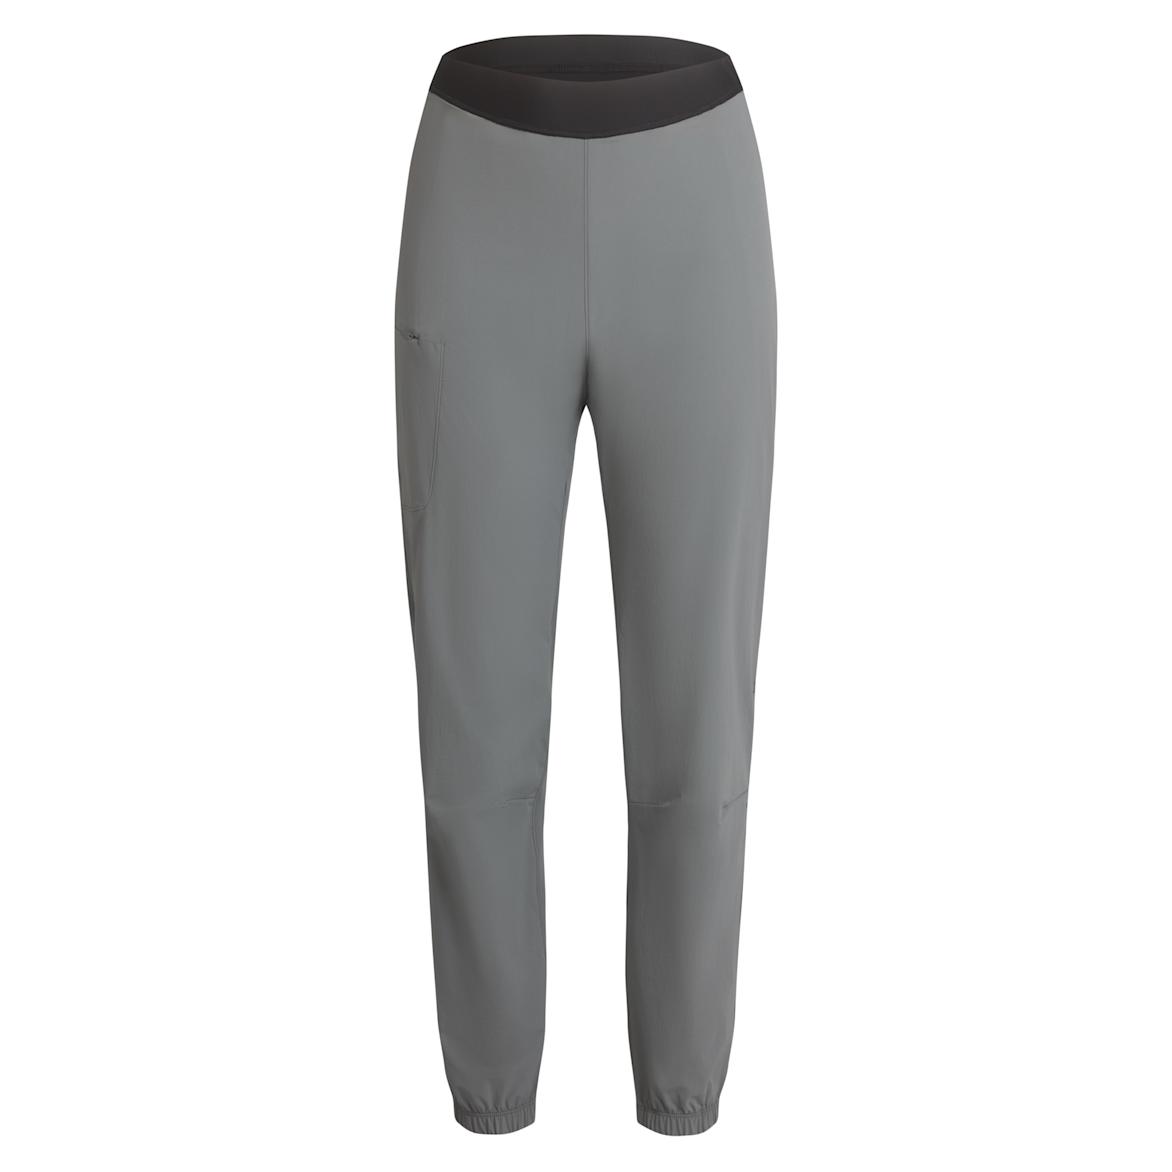 Women's Riding Pants with Pad